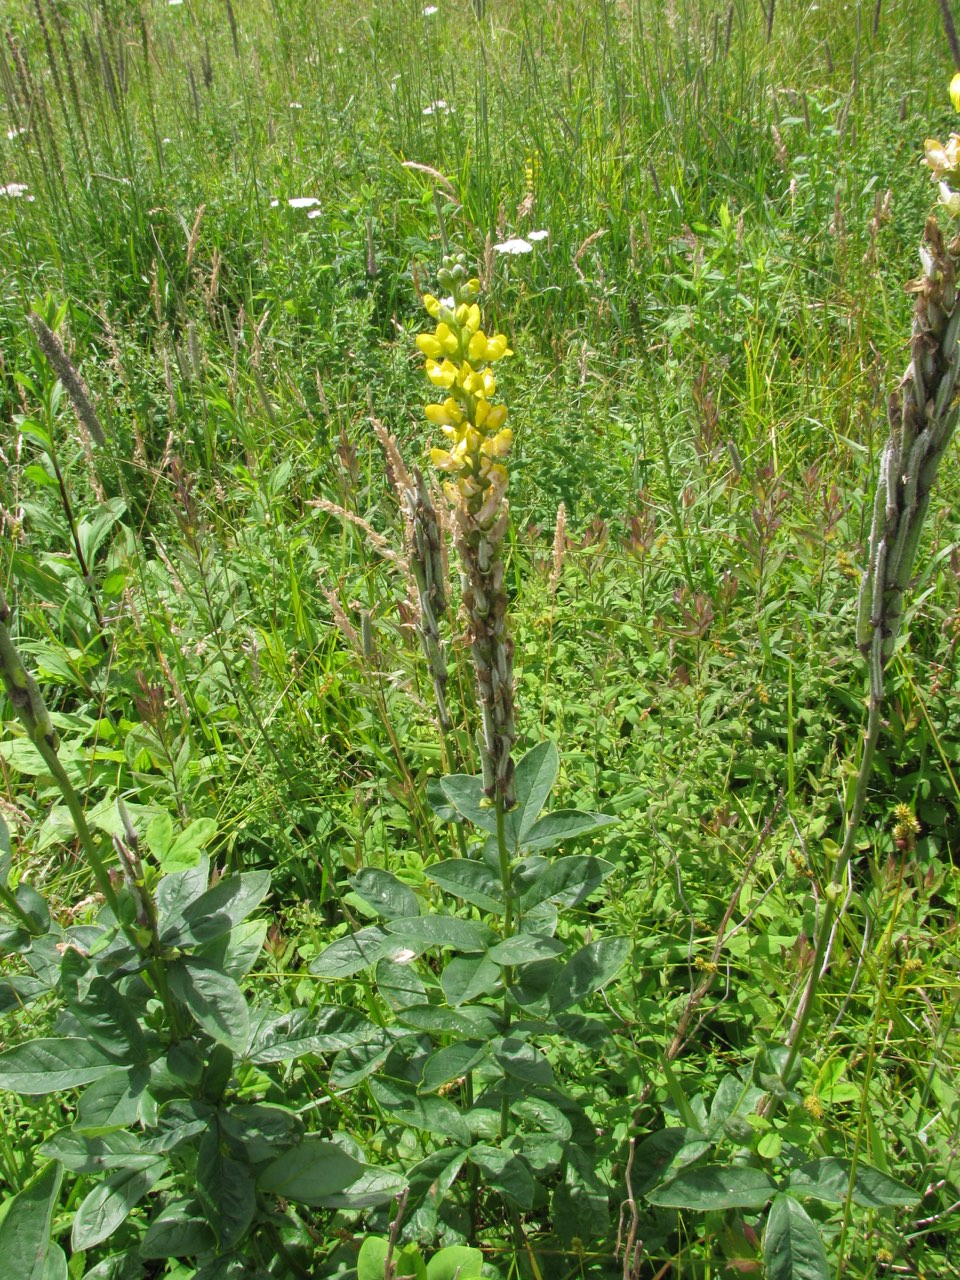 The Scientific Name is Thermopsis villosa [= Thermopsis caroliniana]. You will likely hear them called Blue Ridge Golden-banner, Aaron's-rod, Carolina Lupine, Carolina Bushpea, Carolina False-lupine, Southern Lupine. This picture shows the Has a strongly erect terminal raceme of yellow flowers of Thermopsis villosa [= Thermopsis caroliniana]